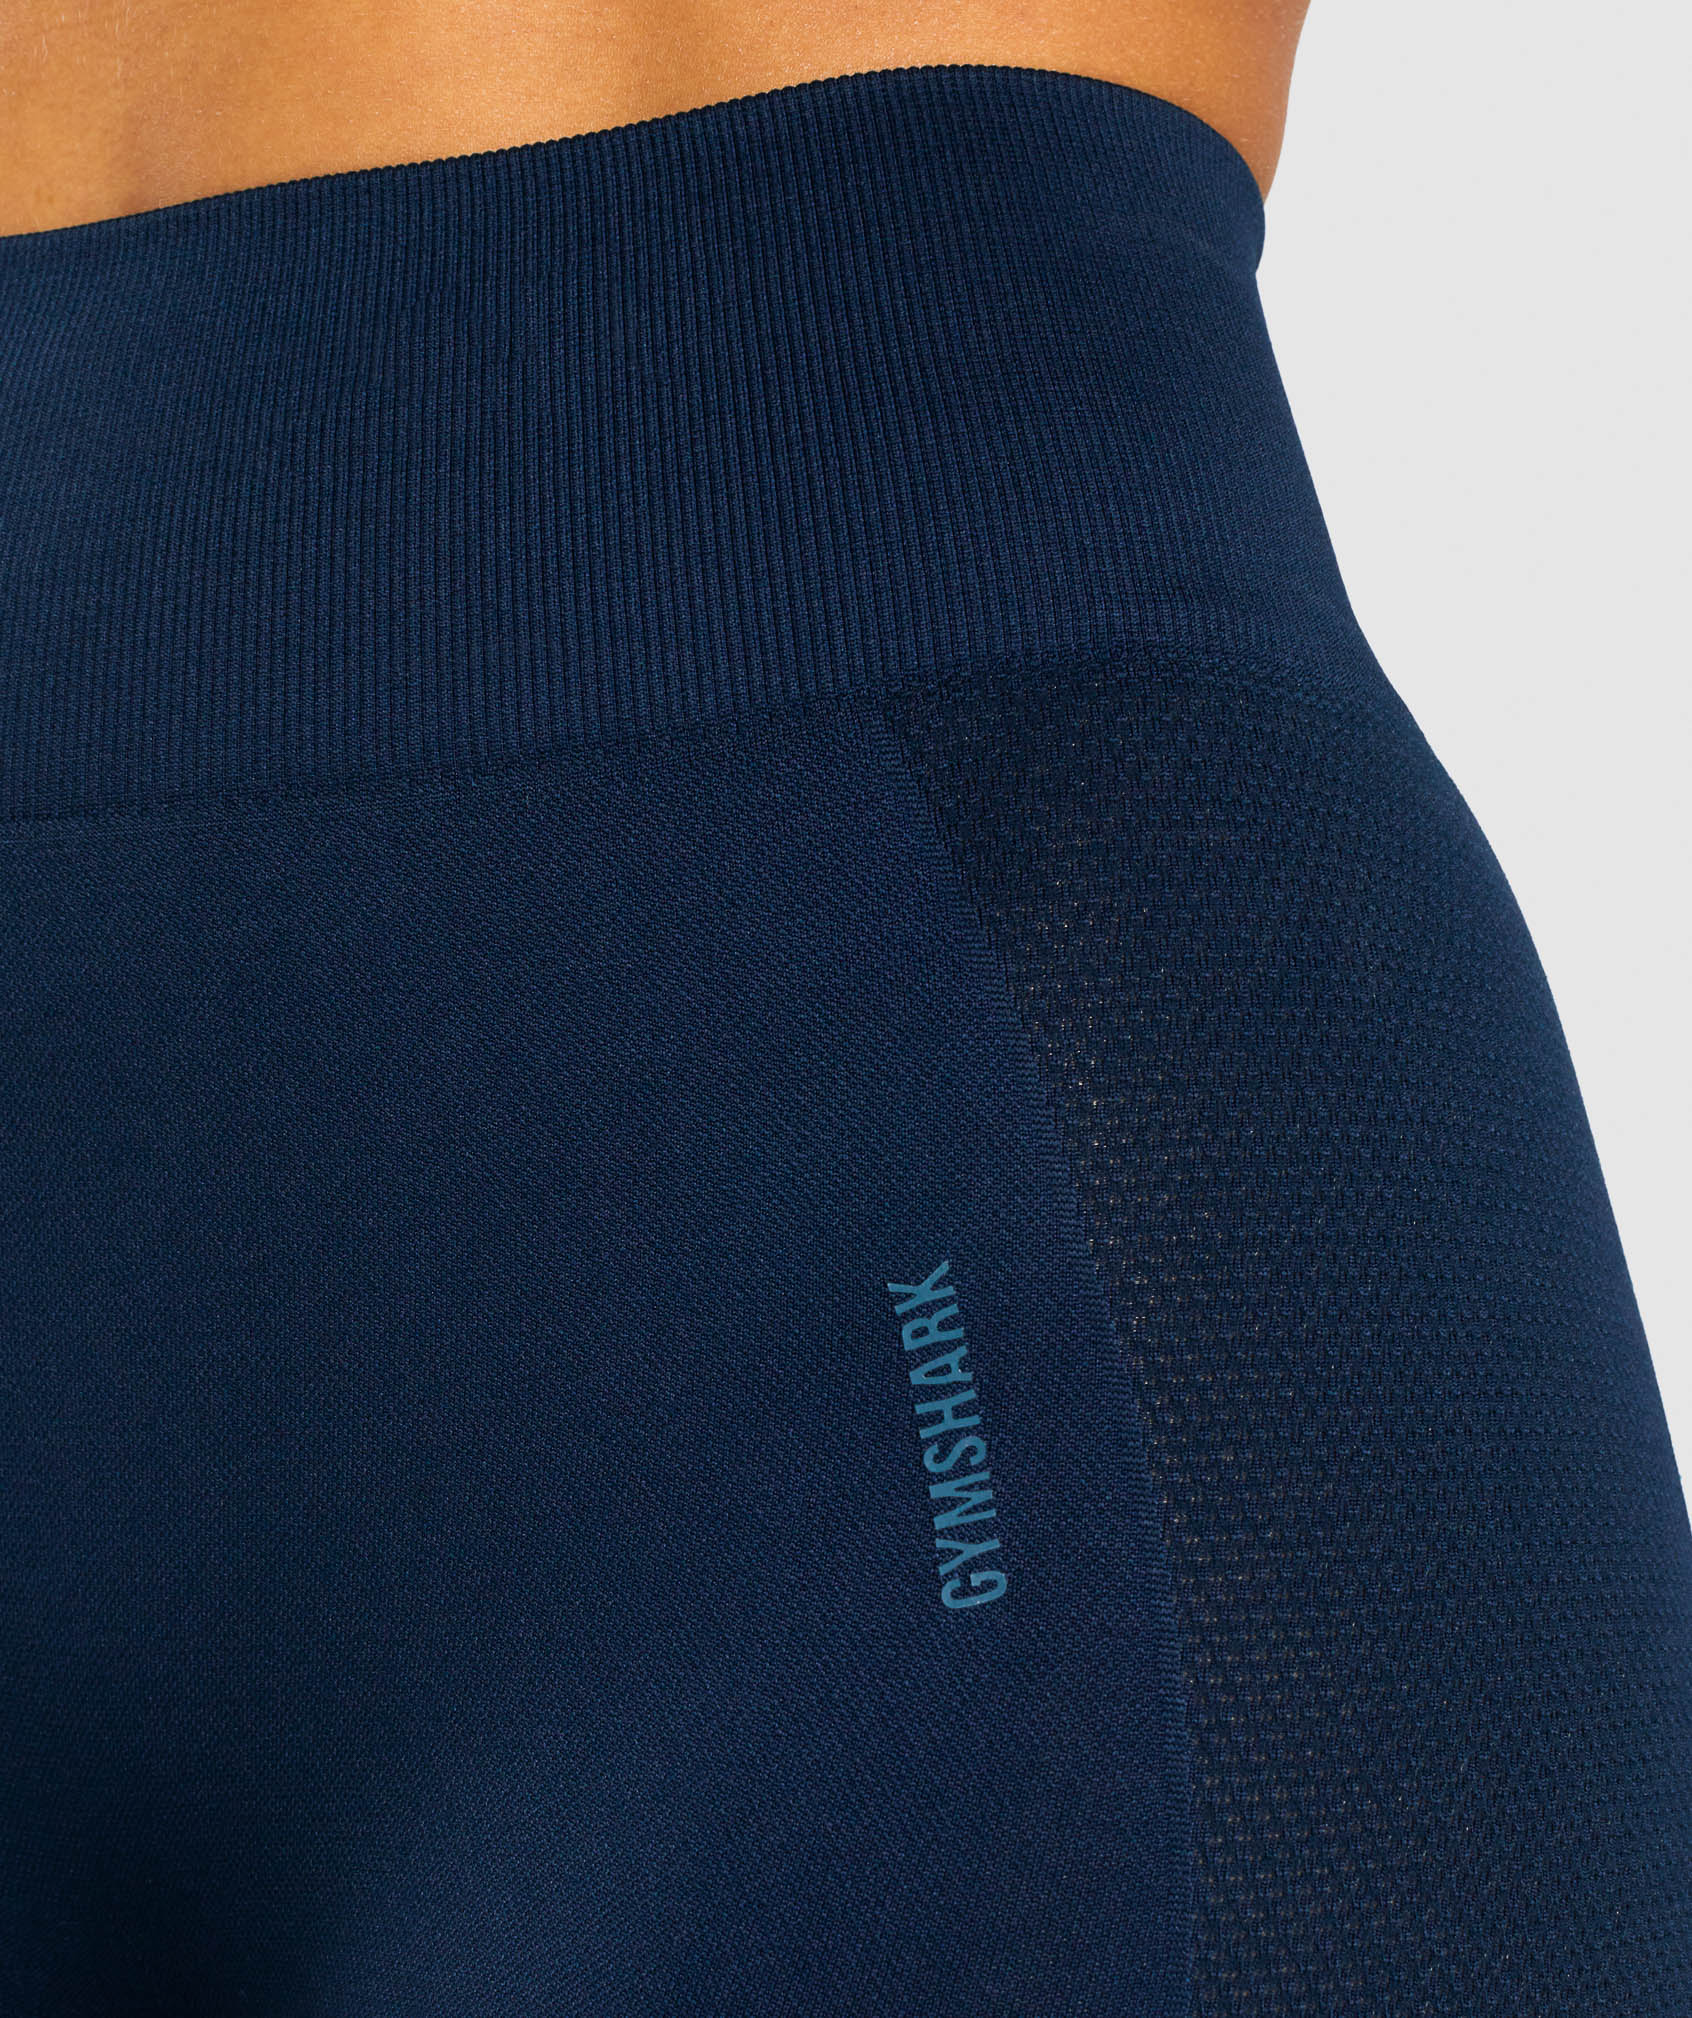 Flex Cycling Shorts in Navy - view 6